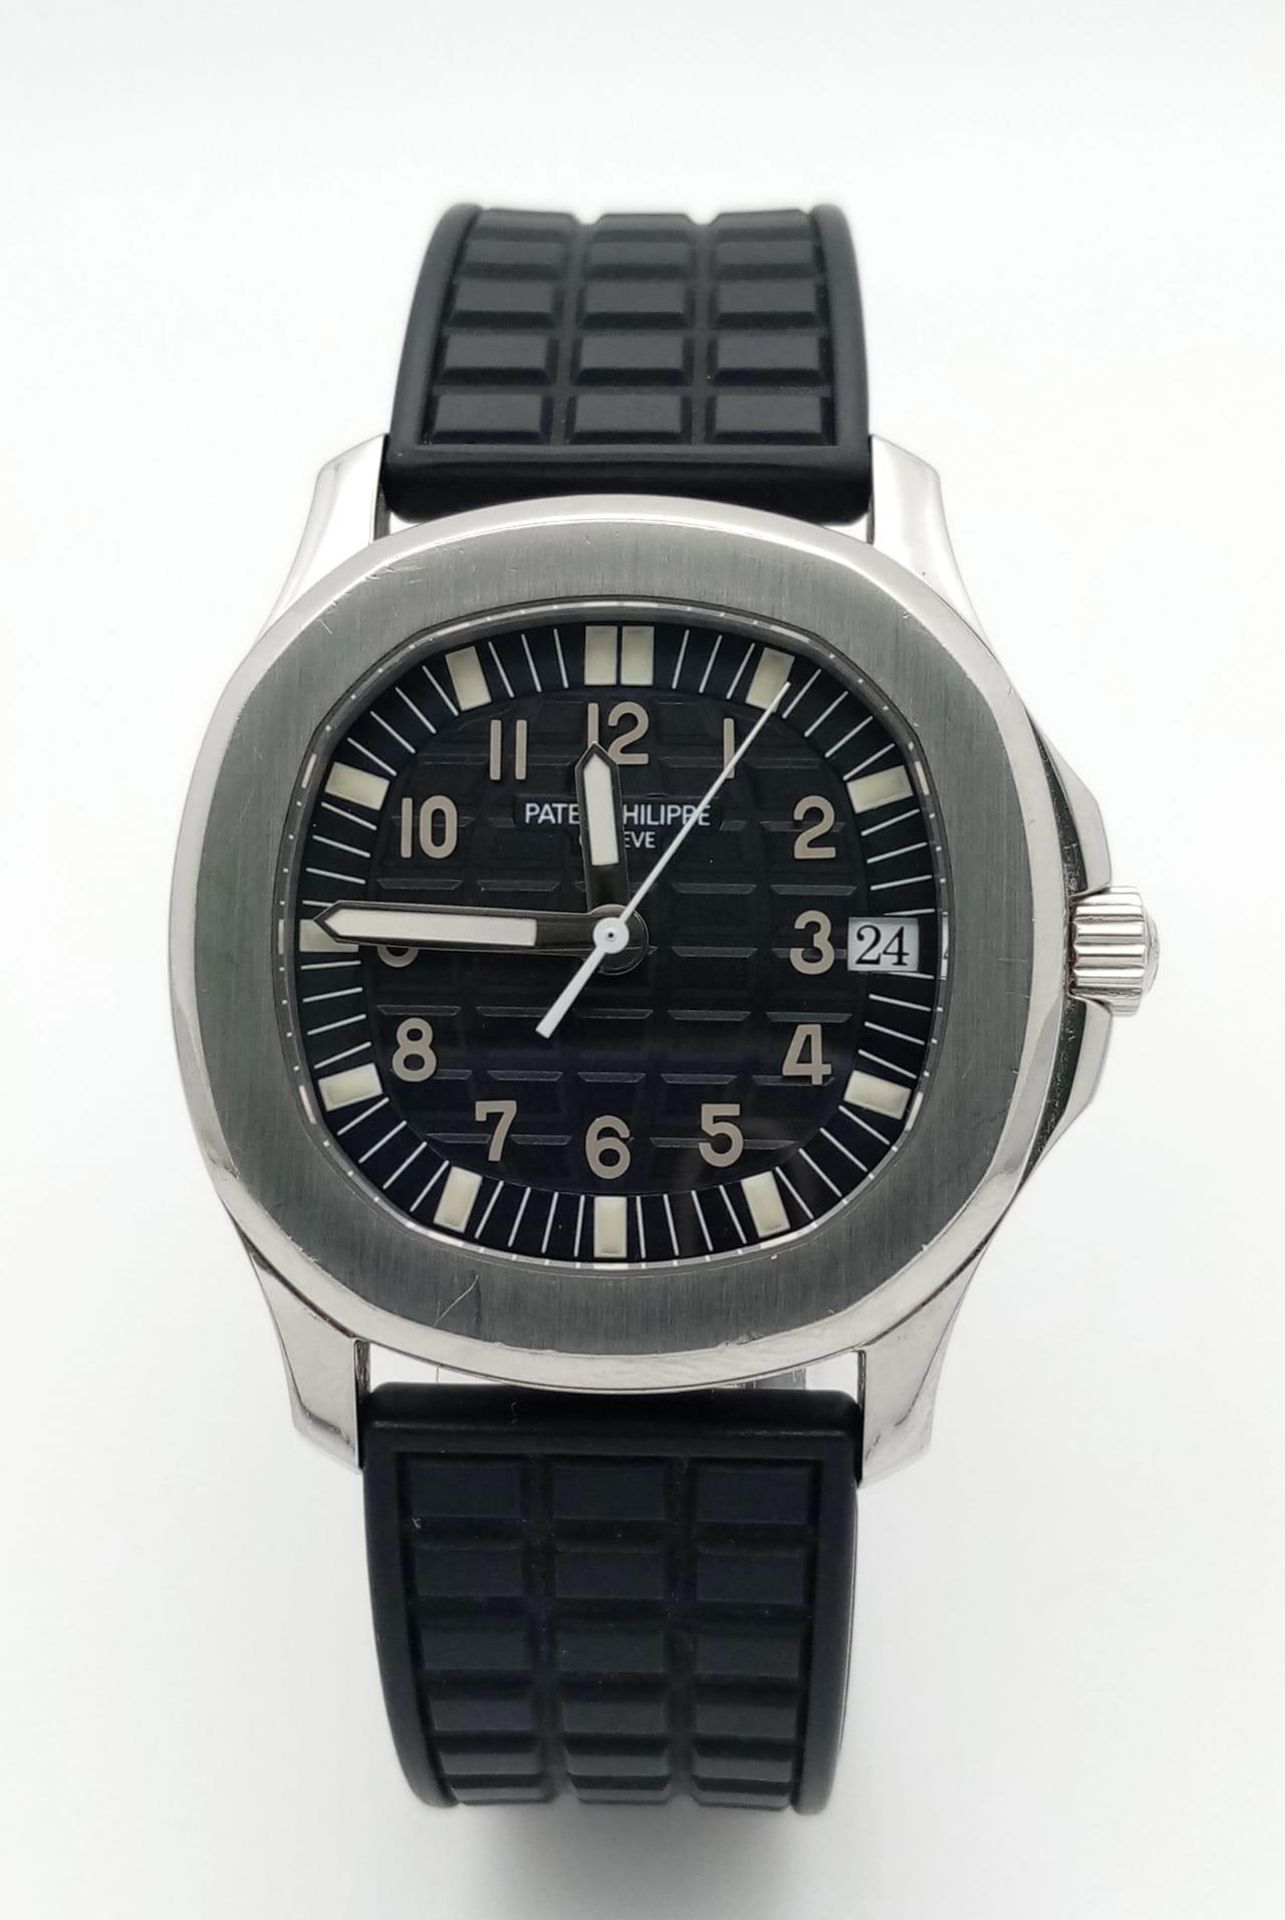 A Patek Phillippe Aquanaut Watch. Textured black rubber strap. Stainless steel case - 36mm. - Image 2 of 8